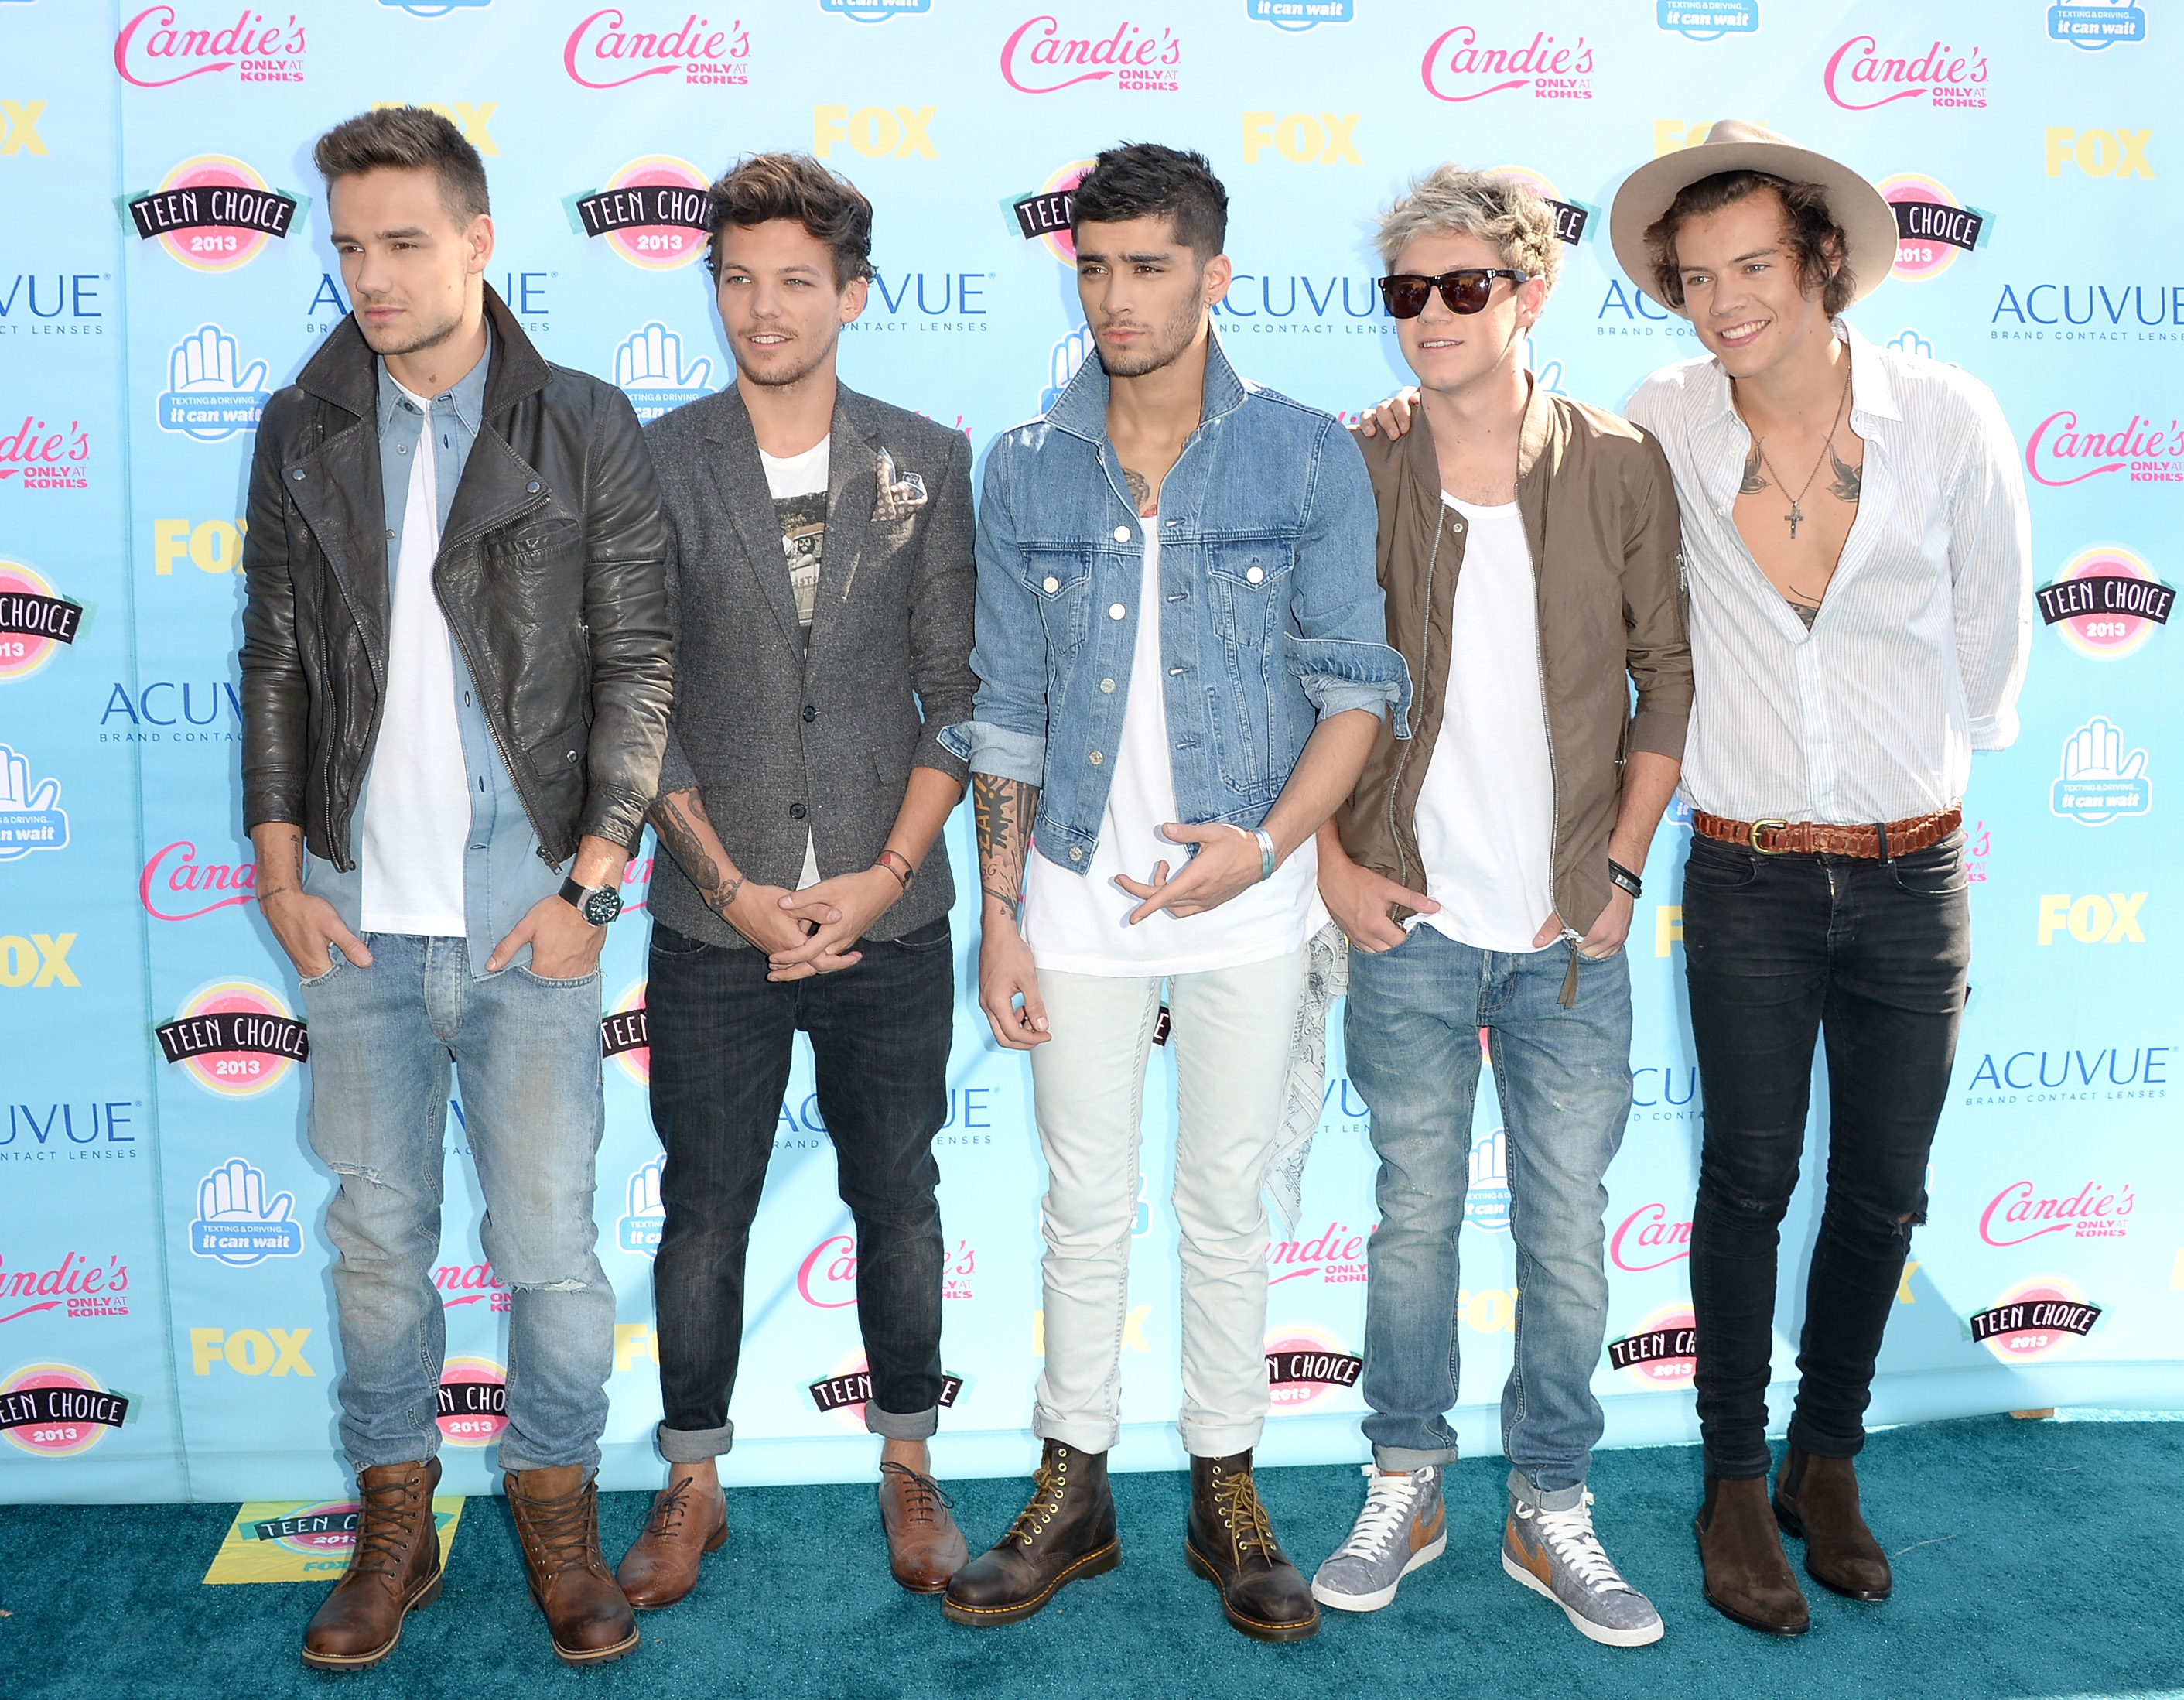 Teen Choice Awards I’m Old Carpet: One Direction